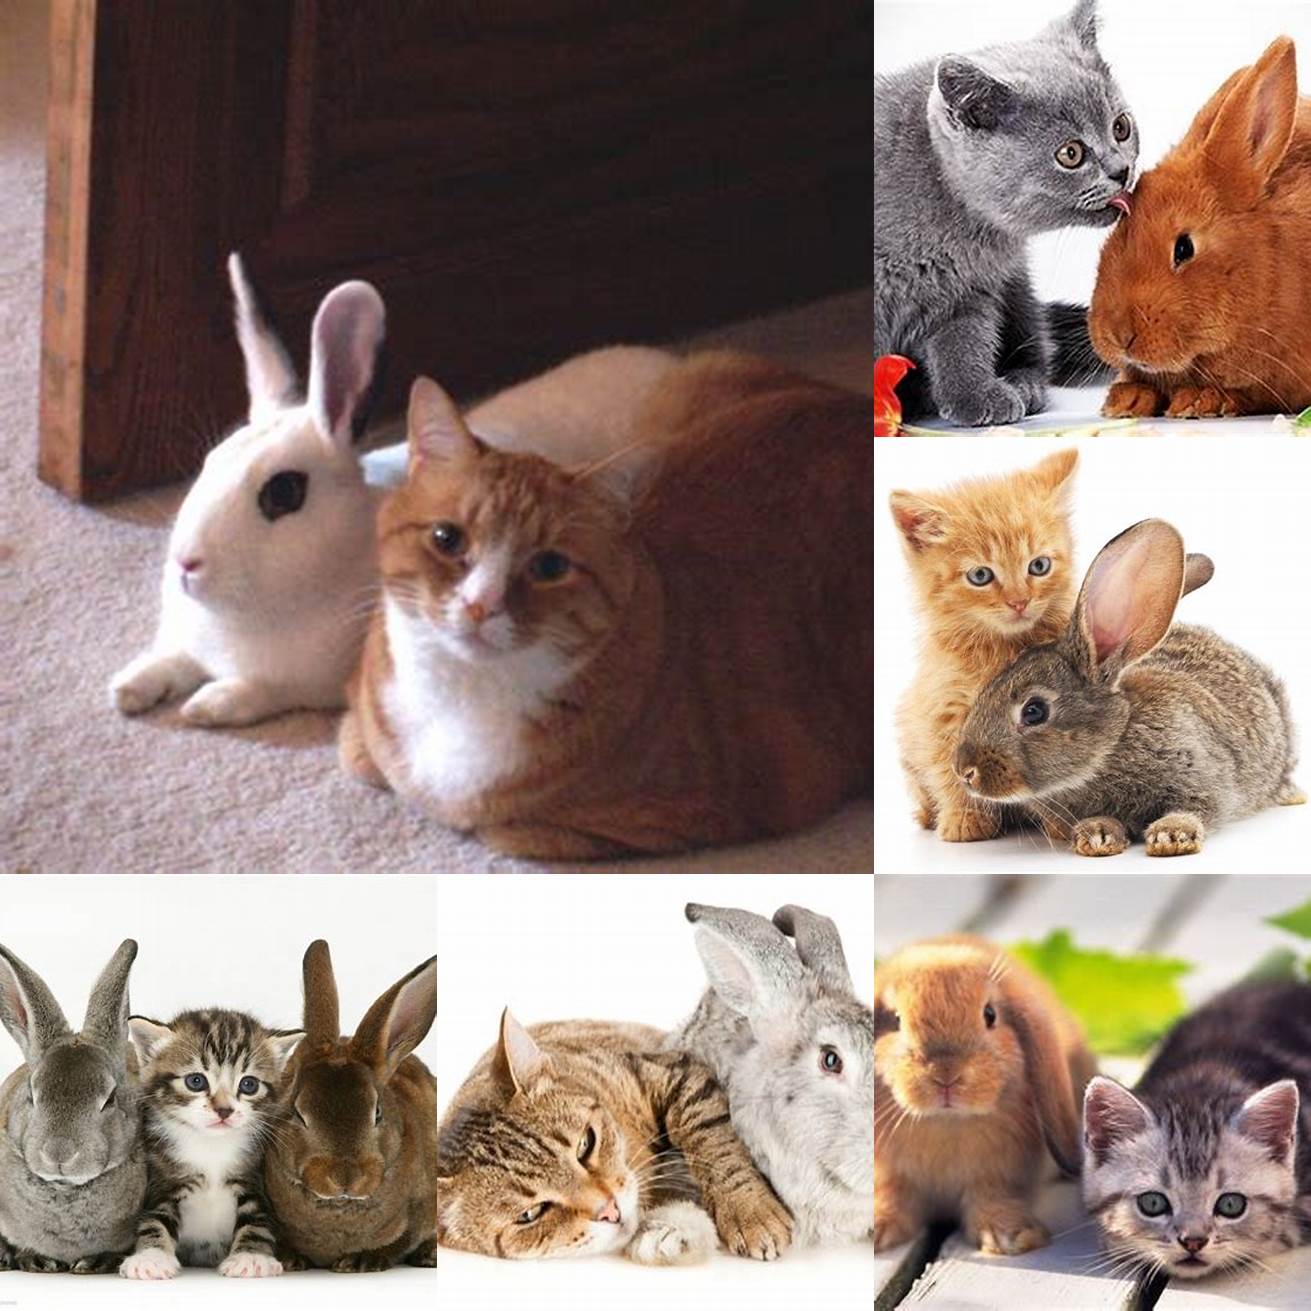 A rabbit and a cat sitting next to each other